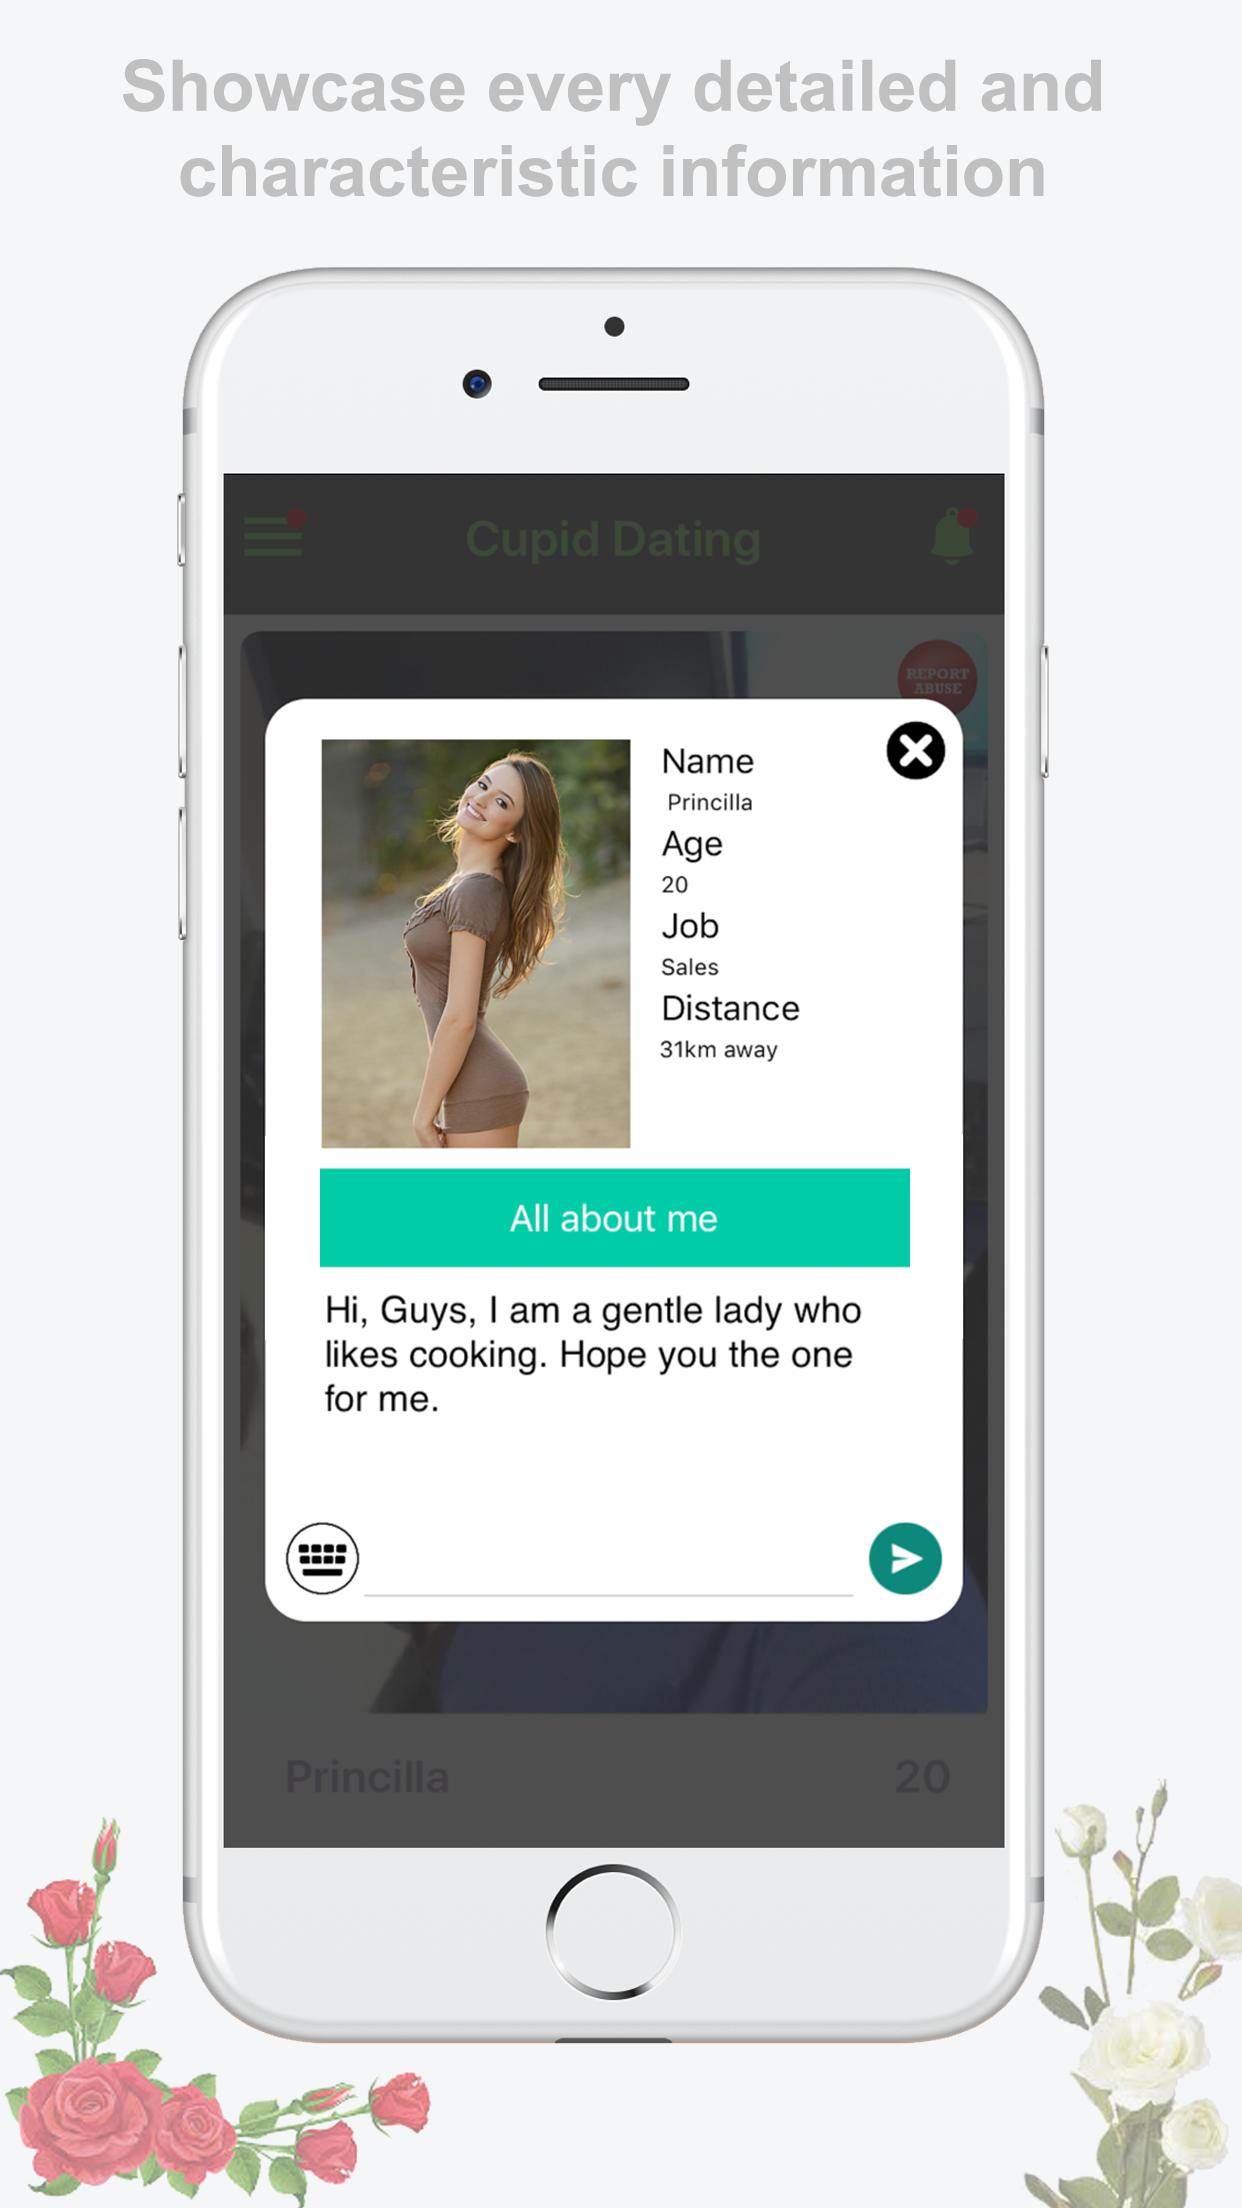 cupidon dating app android